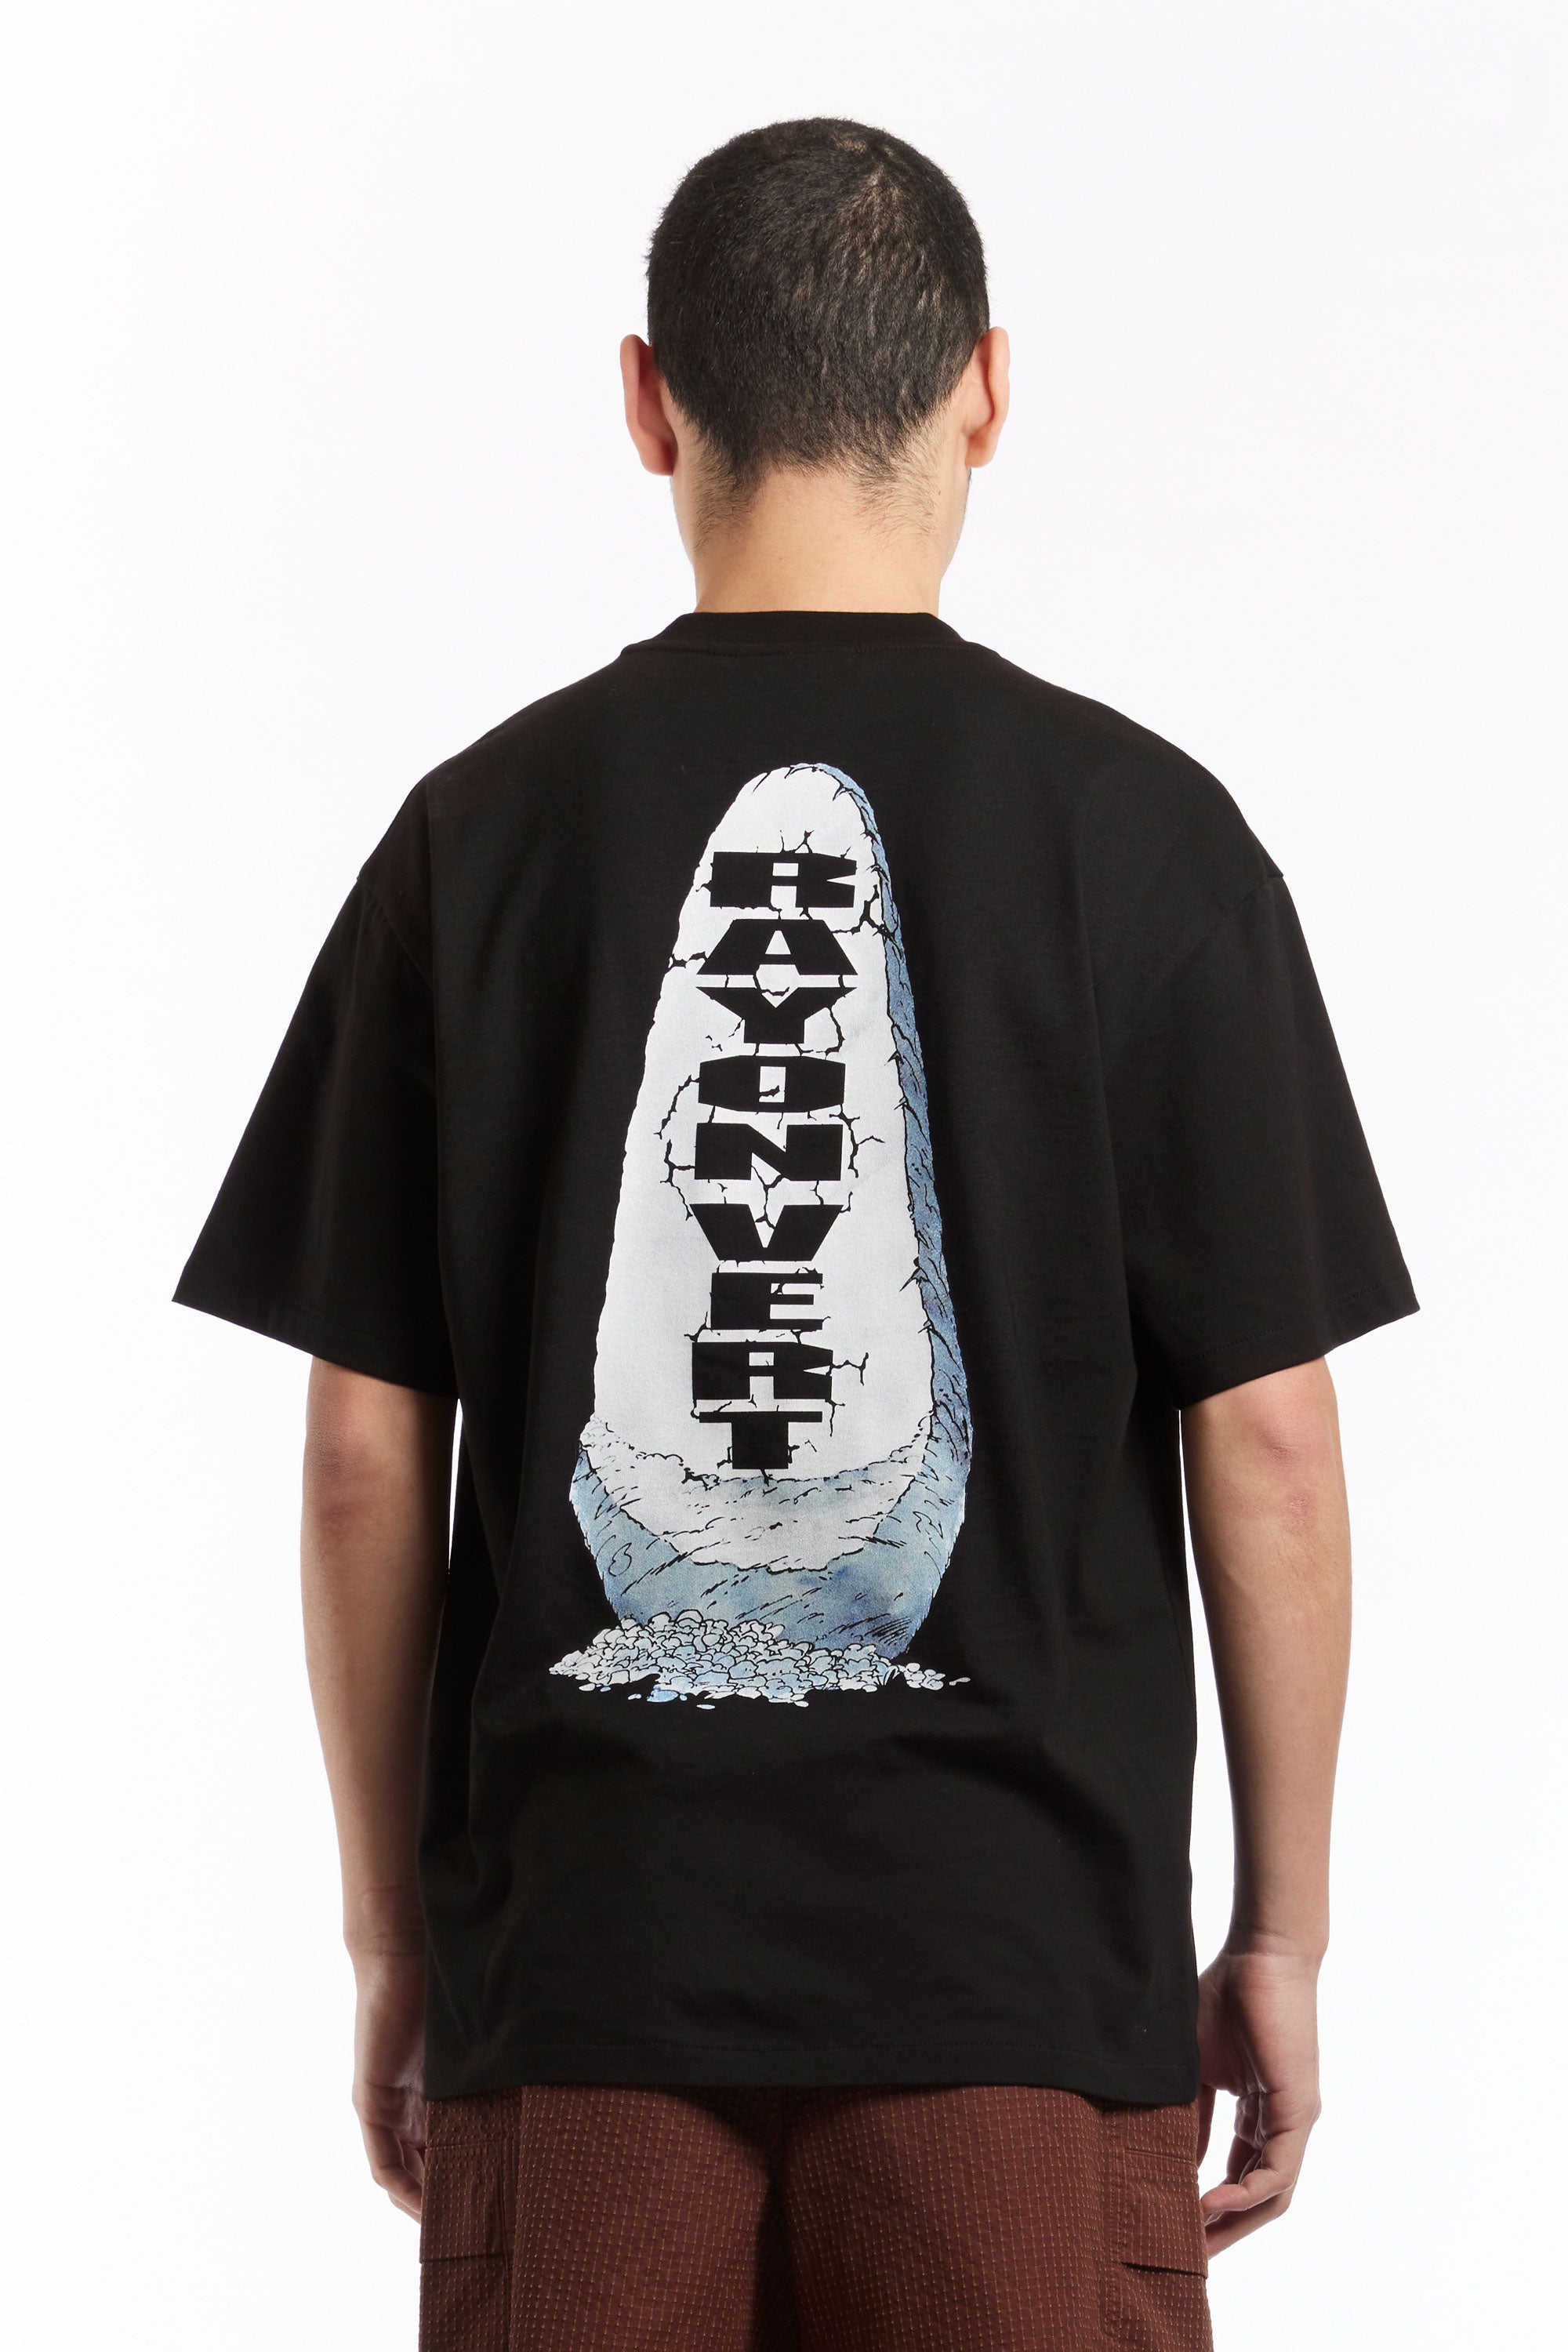 The RAYON VERT - MENHIR T-SHIRT  available online with global shipping, and in PAM Stores Melbourne and Sydney.